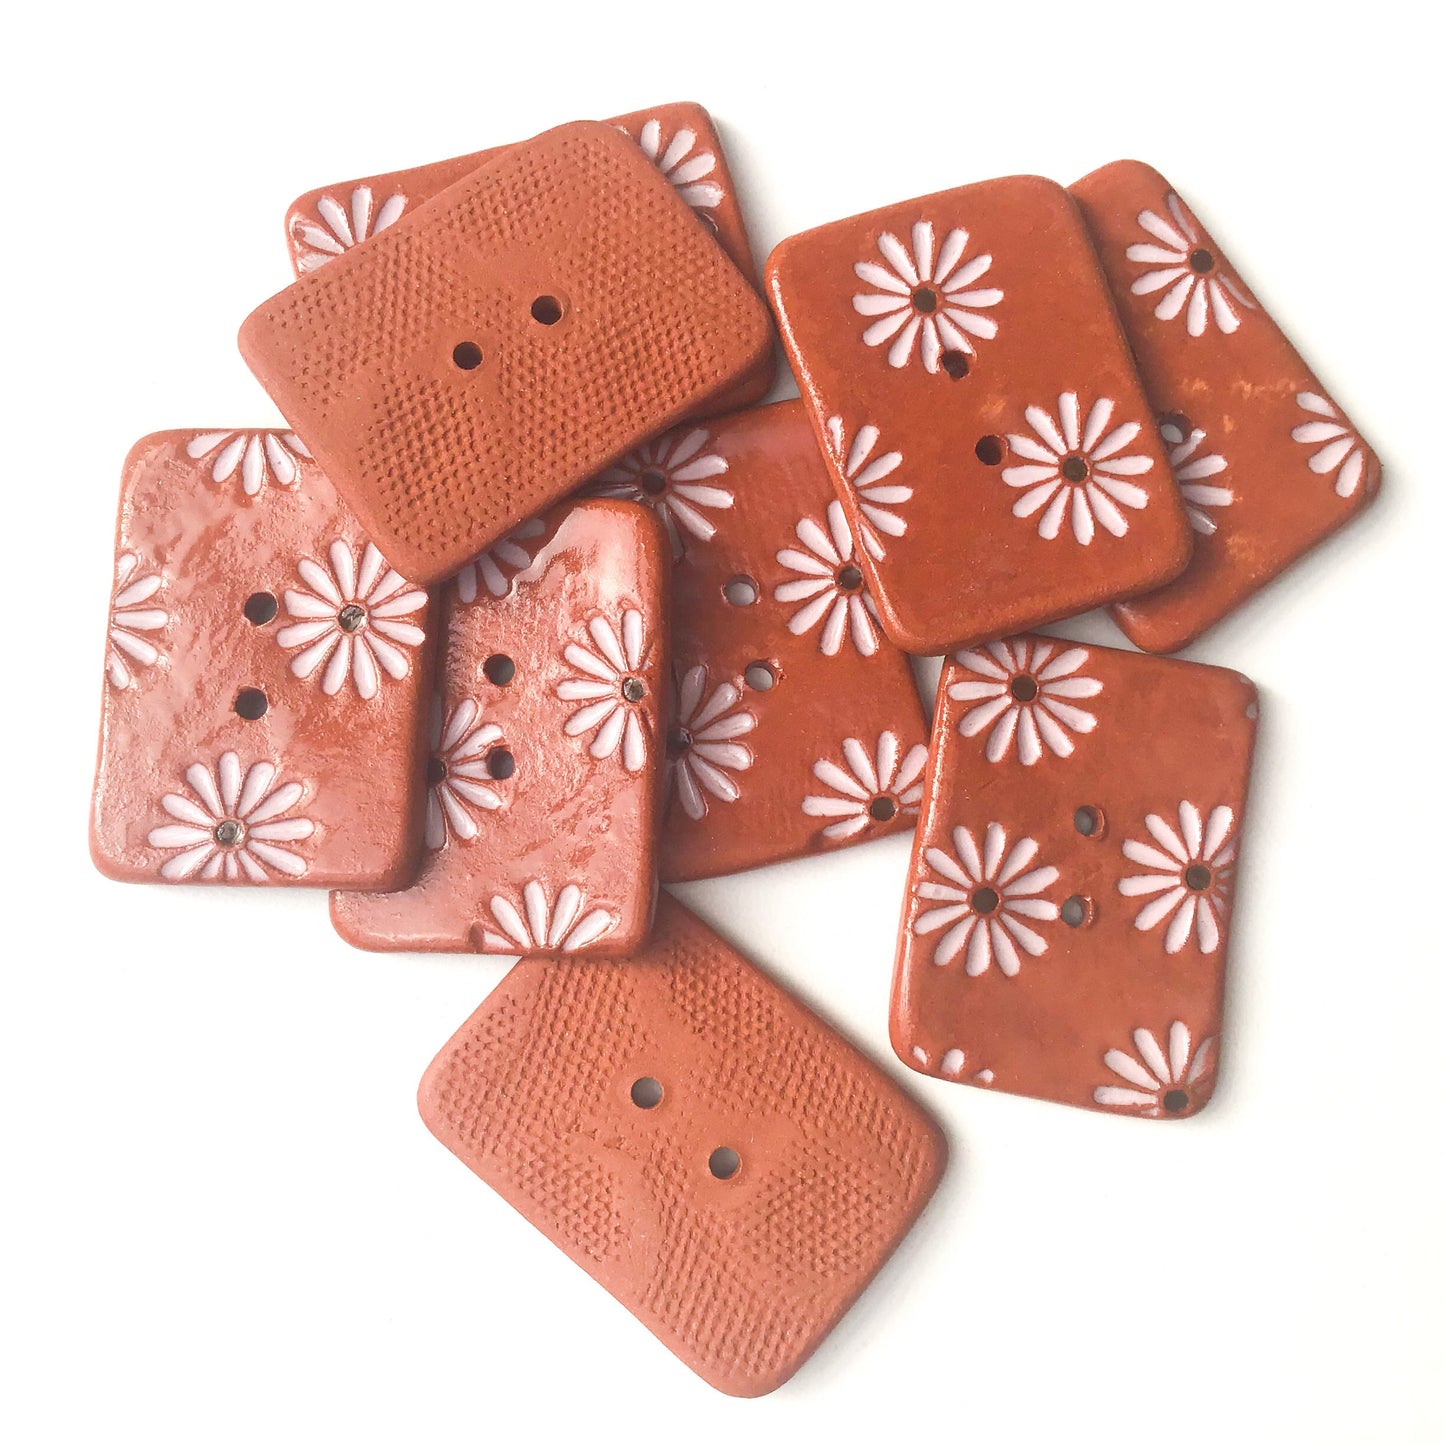 Hand Stamped Daisy Button on Red Clay - Light Pink Flower Buttons - 1 1/16" x 1 7/16"(ws-98)